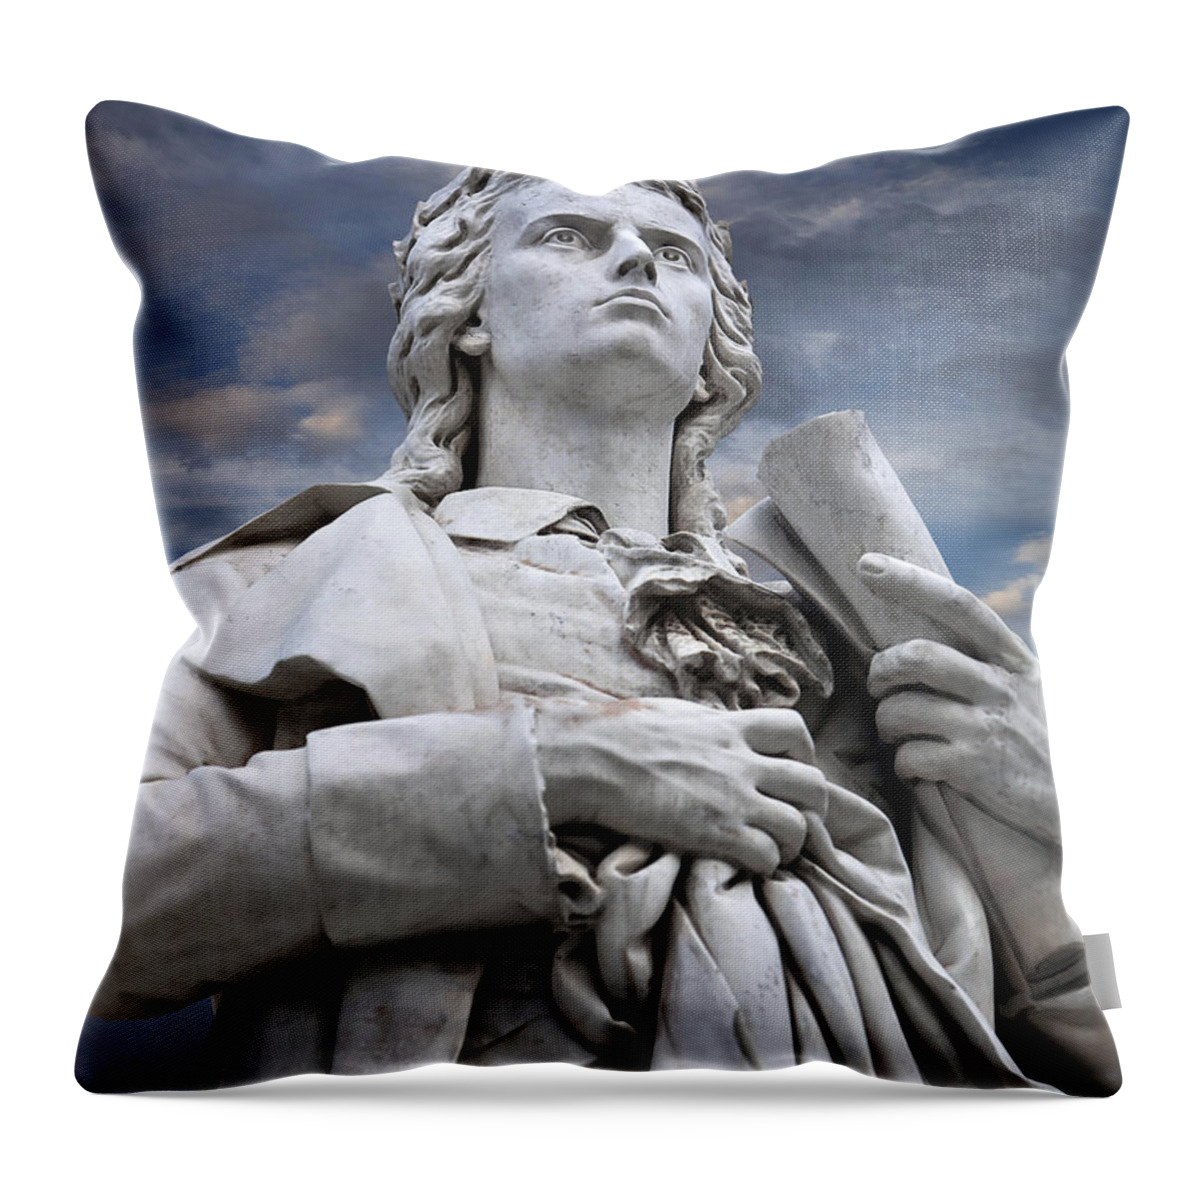 Endre Throw Pillow featuring the photograph Schiller's Statue In Berlin by Endre Balogh